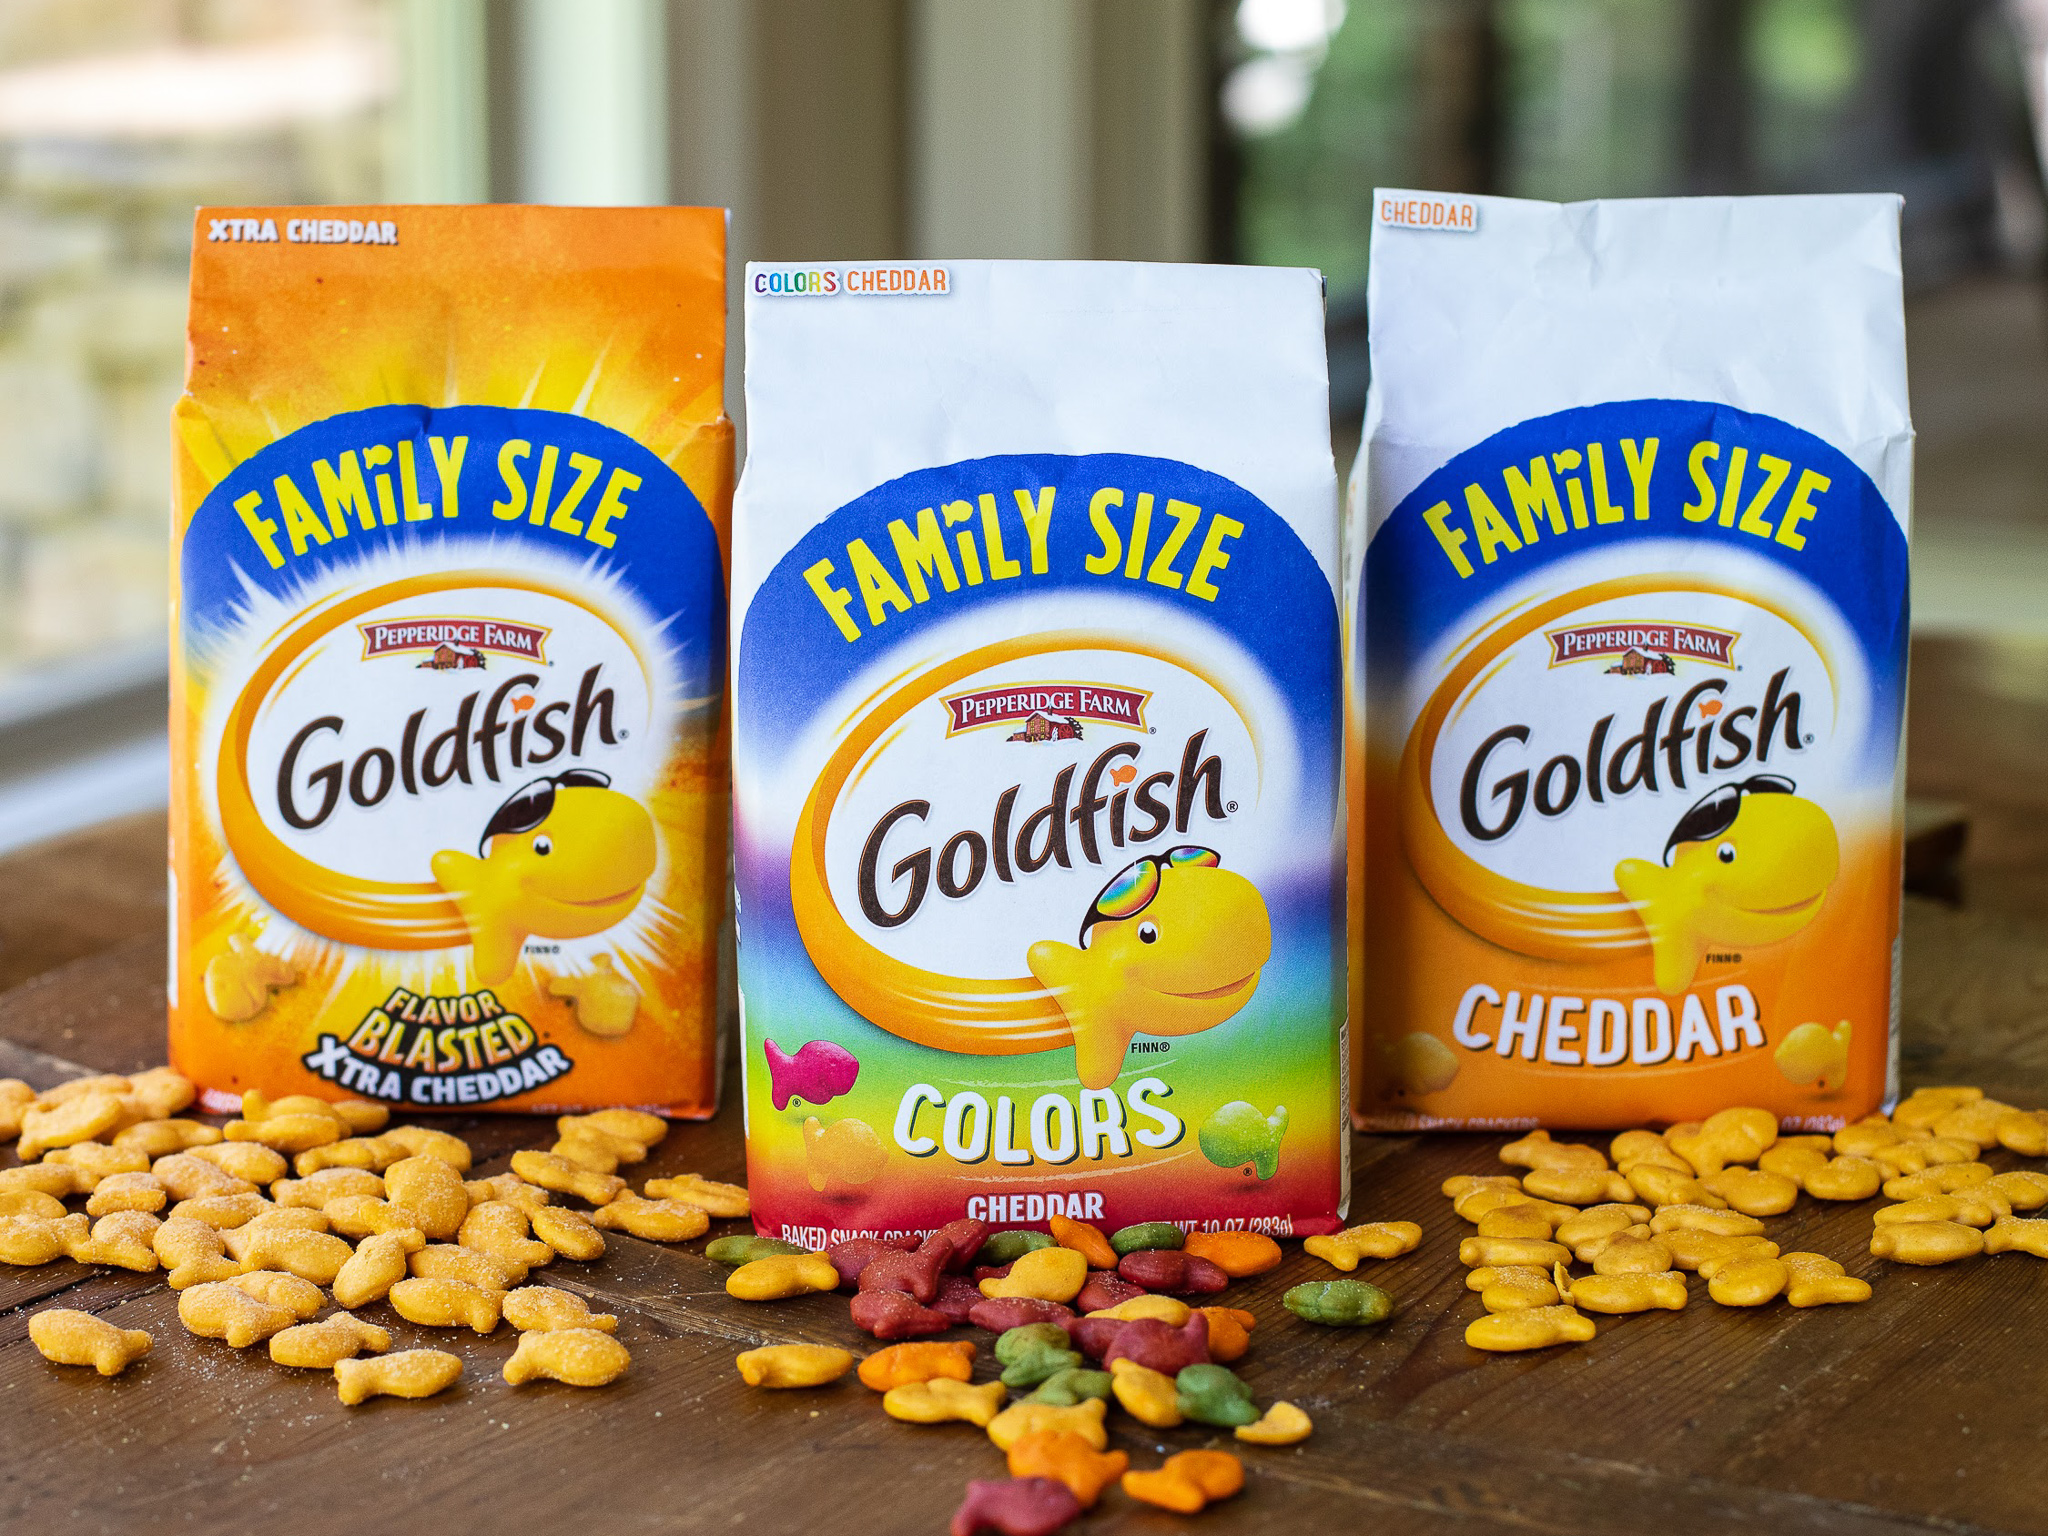 Get Savings On Family Size Pepperidge Farm® Goldfish® Crackers At Publix - Go For The Handful! on I Heart Publix 1